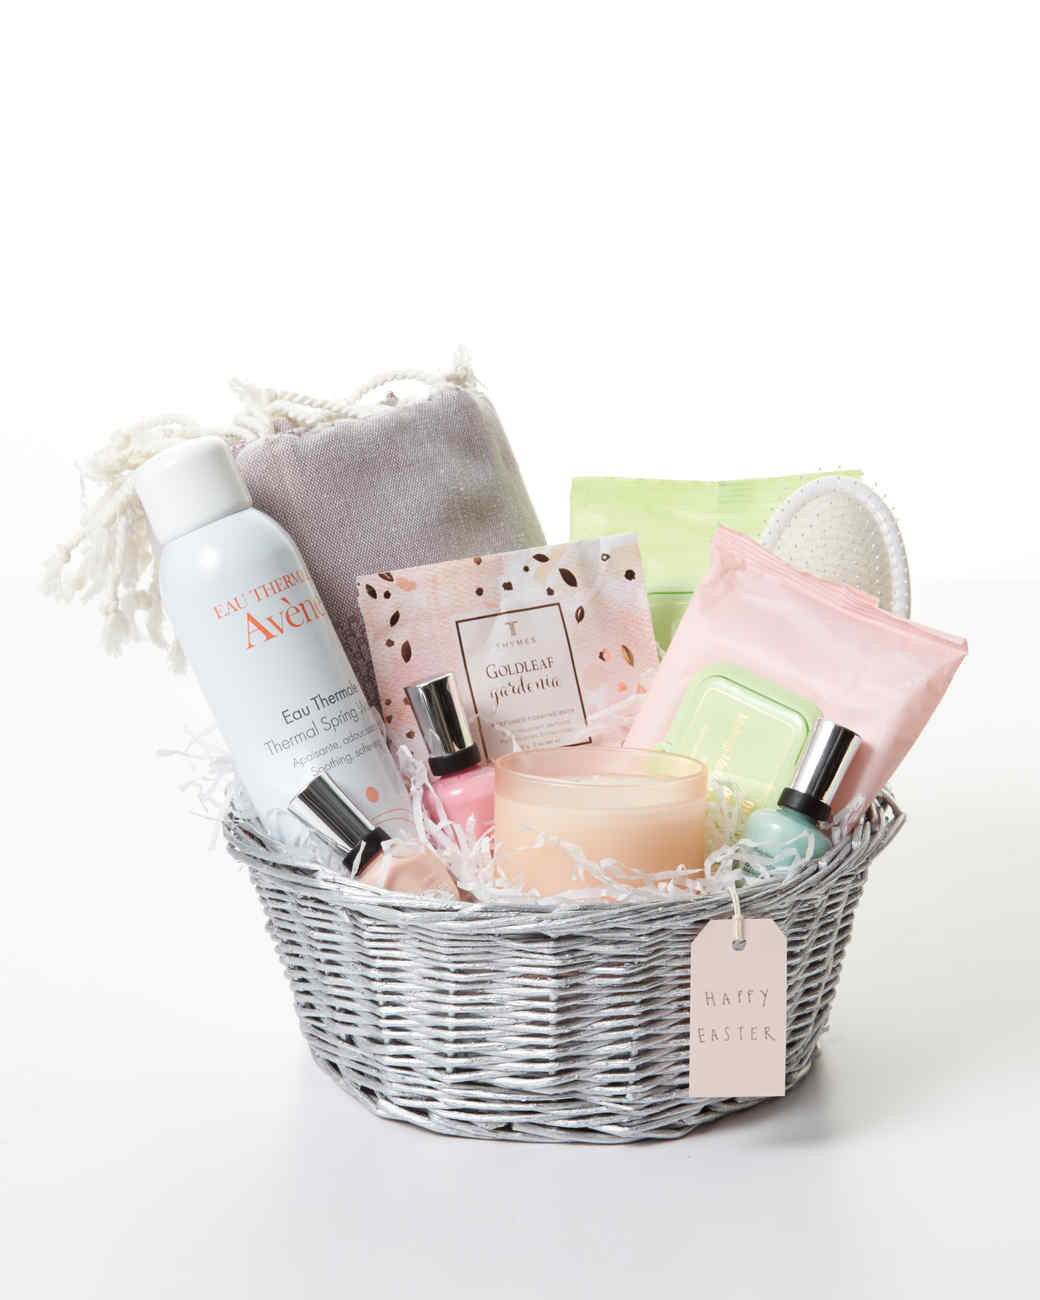 Beauty Gift Basket Ideas
 10 Lavish Easter Basket Ideas for a Spa Day at Home